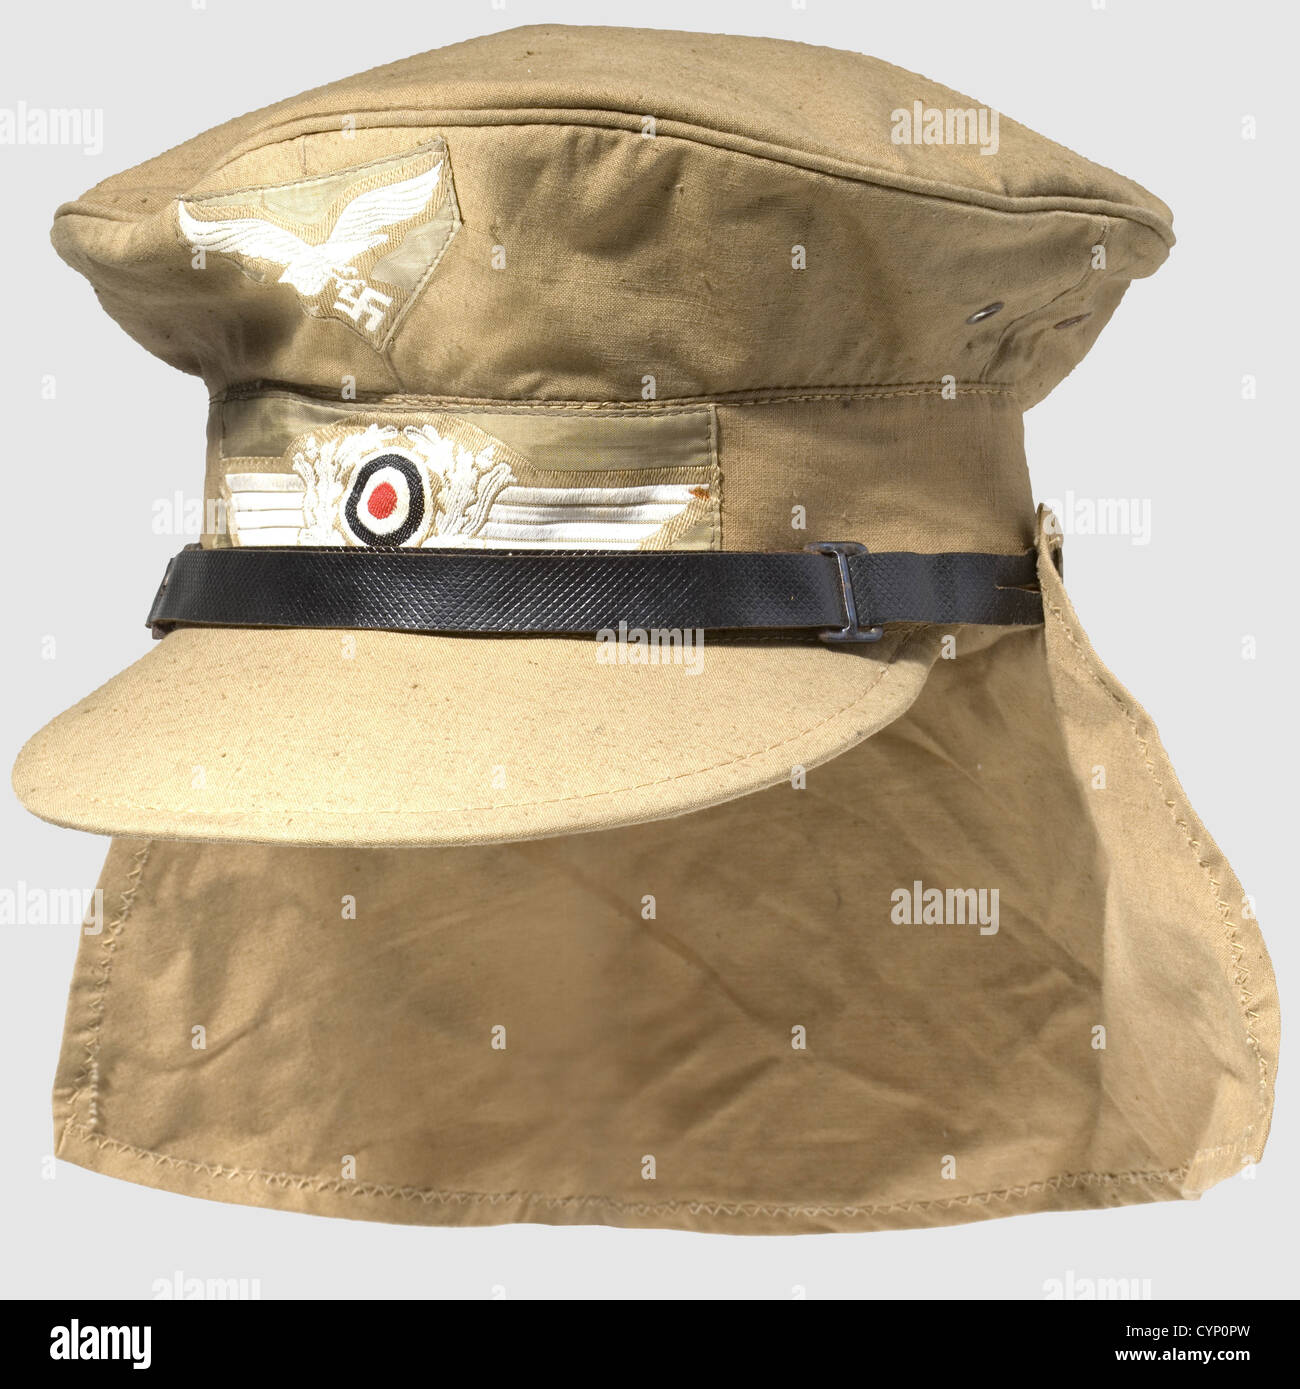 A visor cap for the tropical uniform,the so-called 'Hermann Maier Mütze'. Soft issue of sand-coloured cotton,iron ventilation eyelets and woven insignia on a sand-coloured background,tooled waffle-patterned black chin strap(damaged),button-up neck shield of the same material. Red cover liner with 1943 RB number stamping,sweat band of cap material. Size 57,never worn,slightly crumpled,historic,historical,1930s,20th century,Air Force,branch of service,branches of service,armed service,armed services,military,militaria,air forces,object,objec,Additional-Rights-Clearences-Not Available Stock Photo